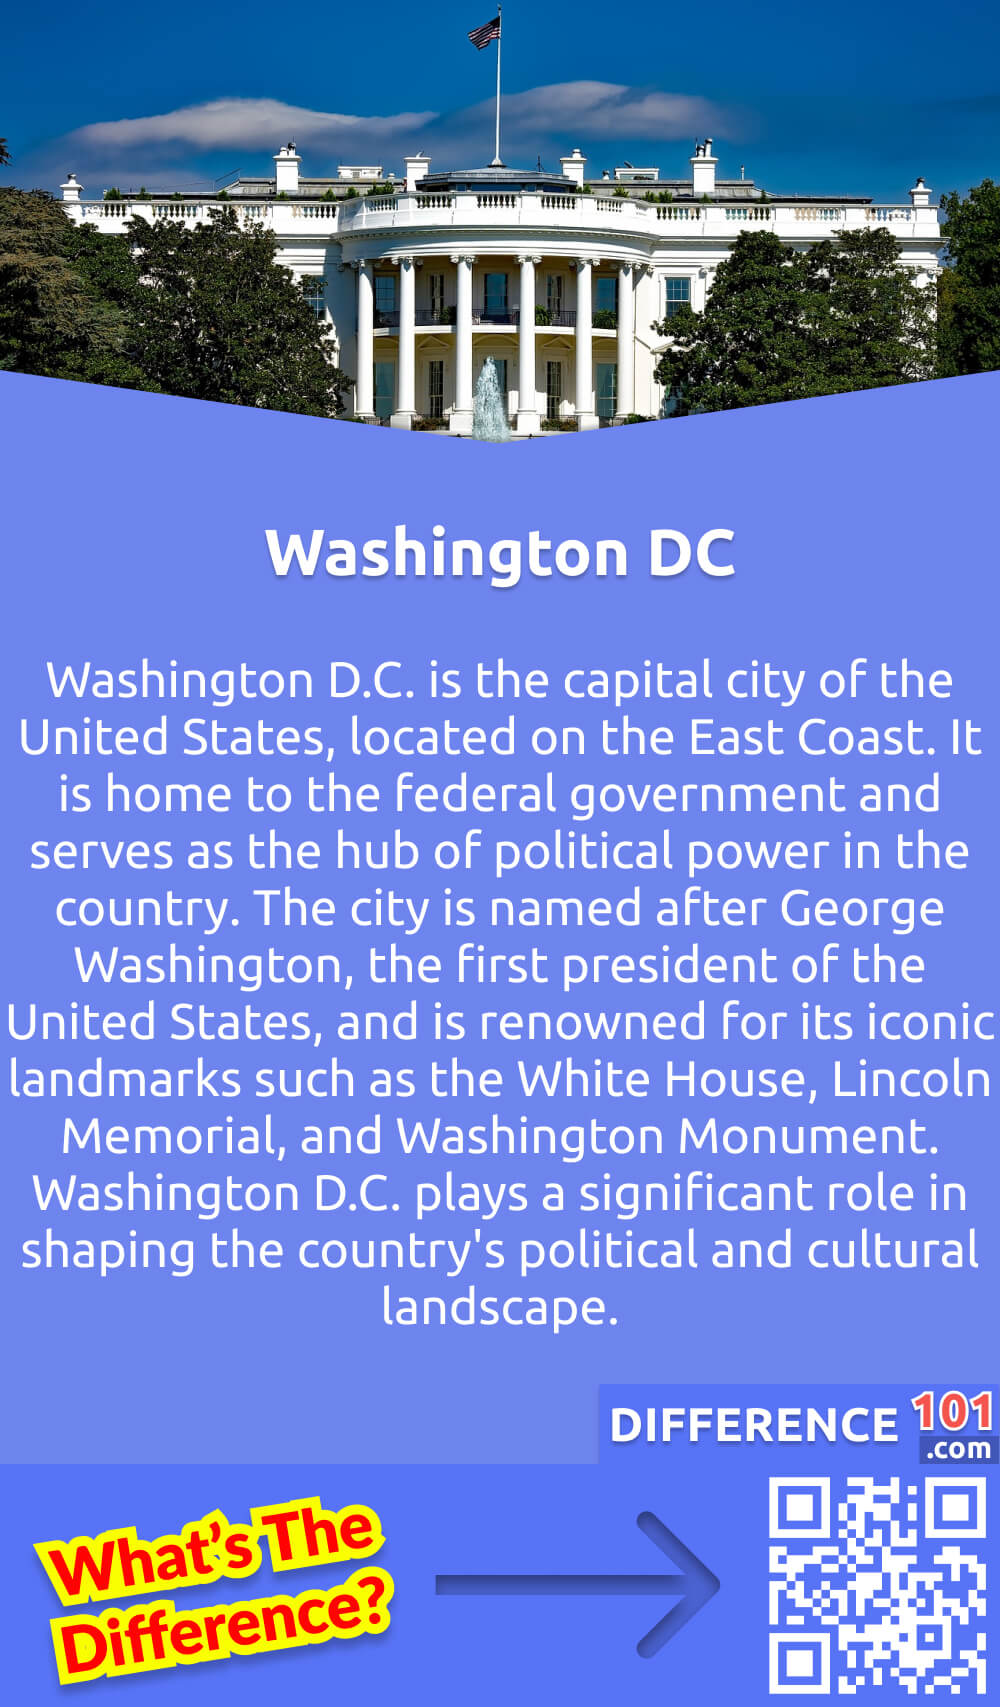 What Is Washington DC? Washington D.C. is the capital city of the United States, located on the East Coast. It is home to the federal government and serves as the hub of political power in the country. The city is named after George Washington, the first president of the United States, and is renowned for its iconic landmarks such as the White House, Lincoln Memorial, and Washington Monument. Washington D.C. plays a significant role in shaping the country's political and cultural landscape. Additionally, it is a major center for international diplomacy, hosting embassies and consulates from around the world. The city is also known for its diverse population, historic neighborhoods, and world-class museums.
